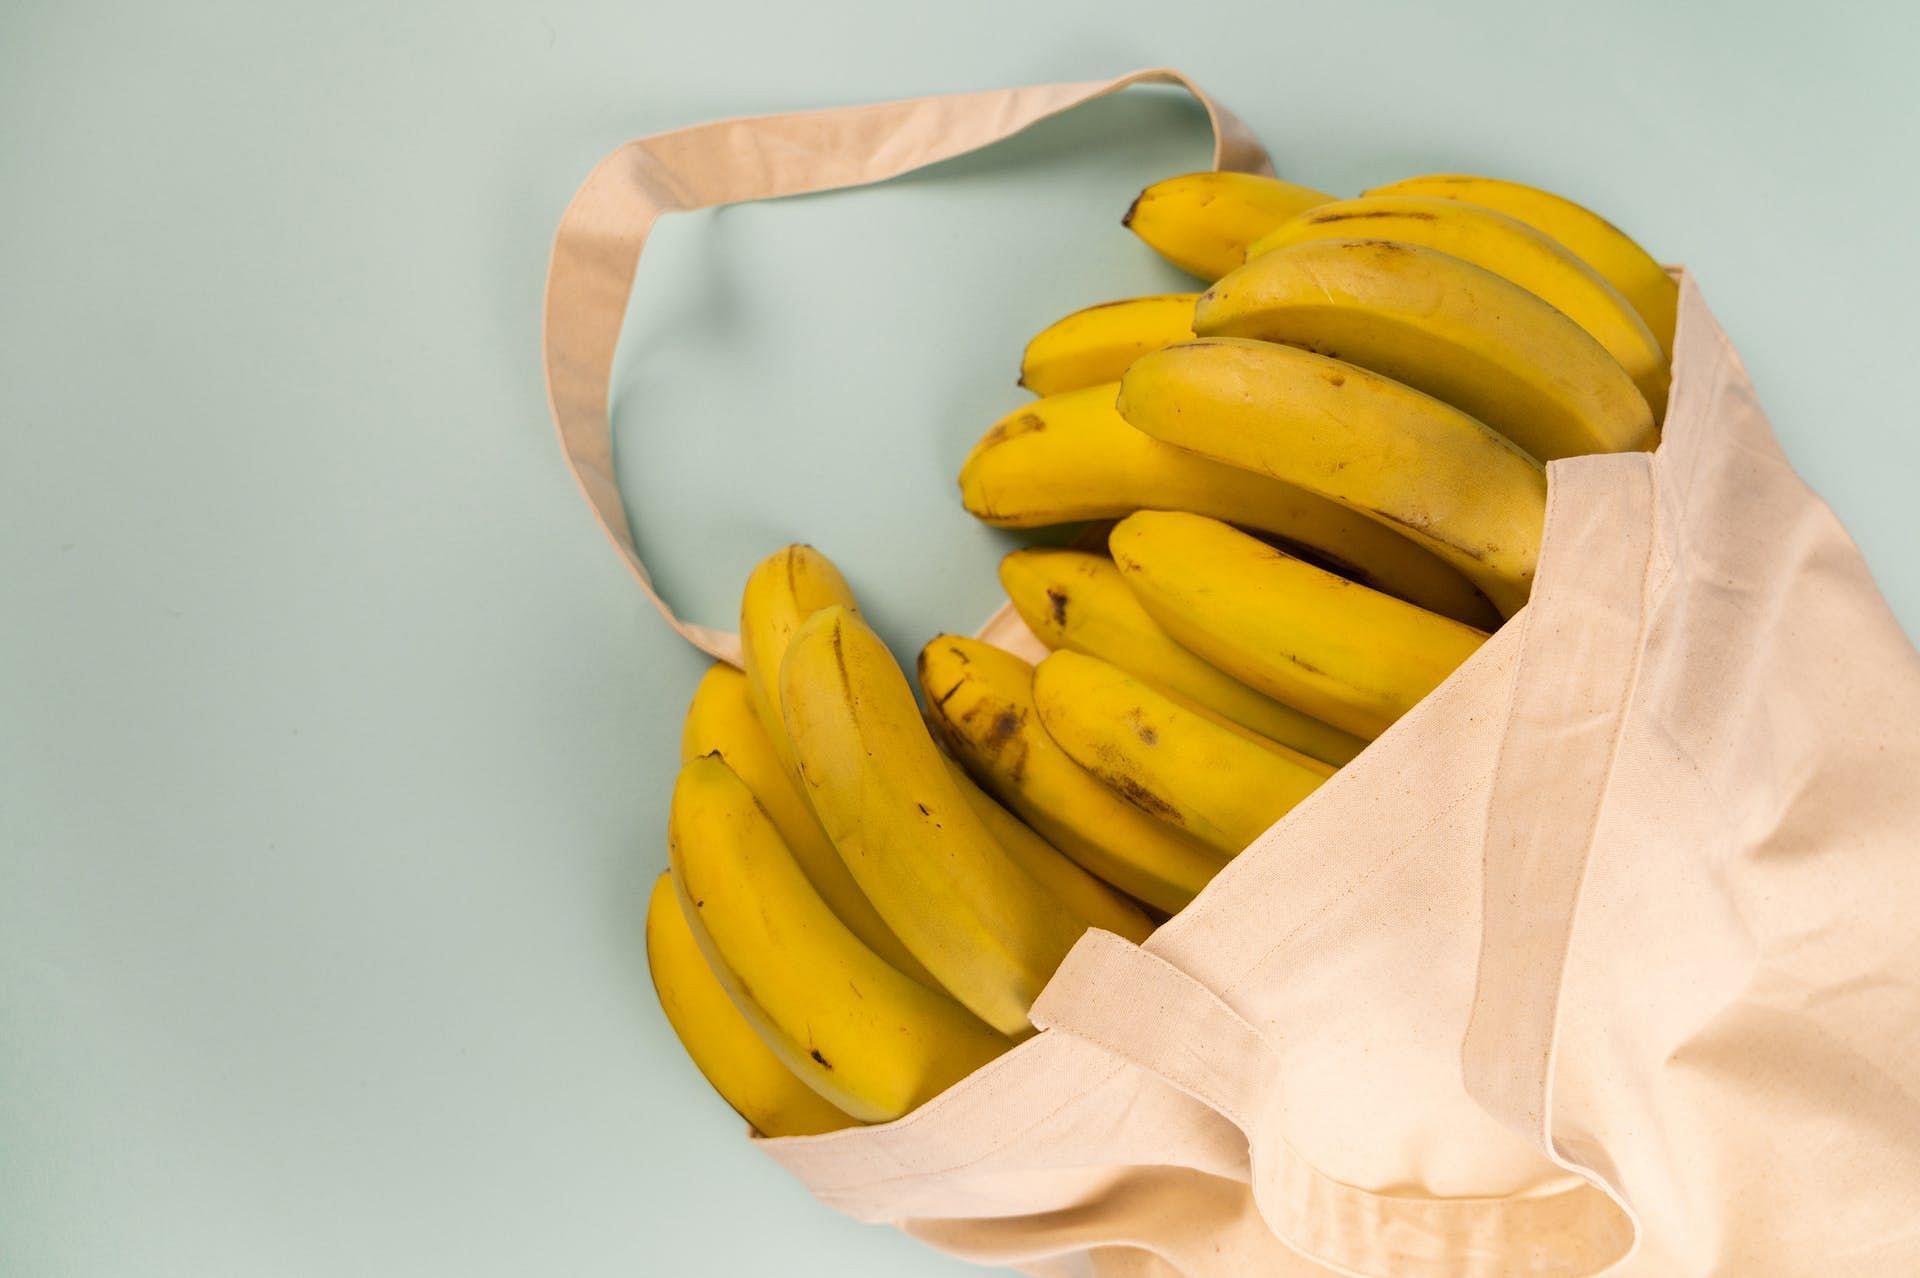 Over-ripe bananas are foods to avoid with PCOS. (Image via Pexels/SHVETS production)